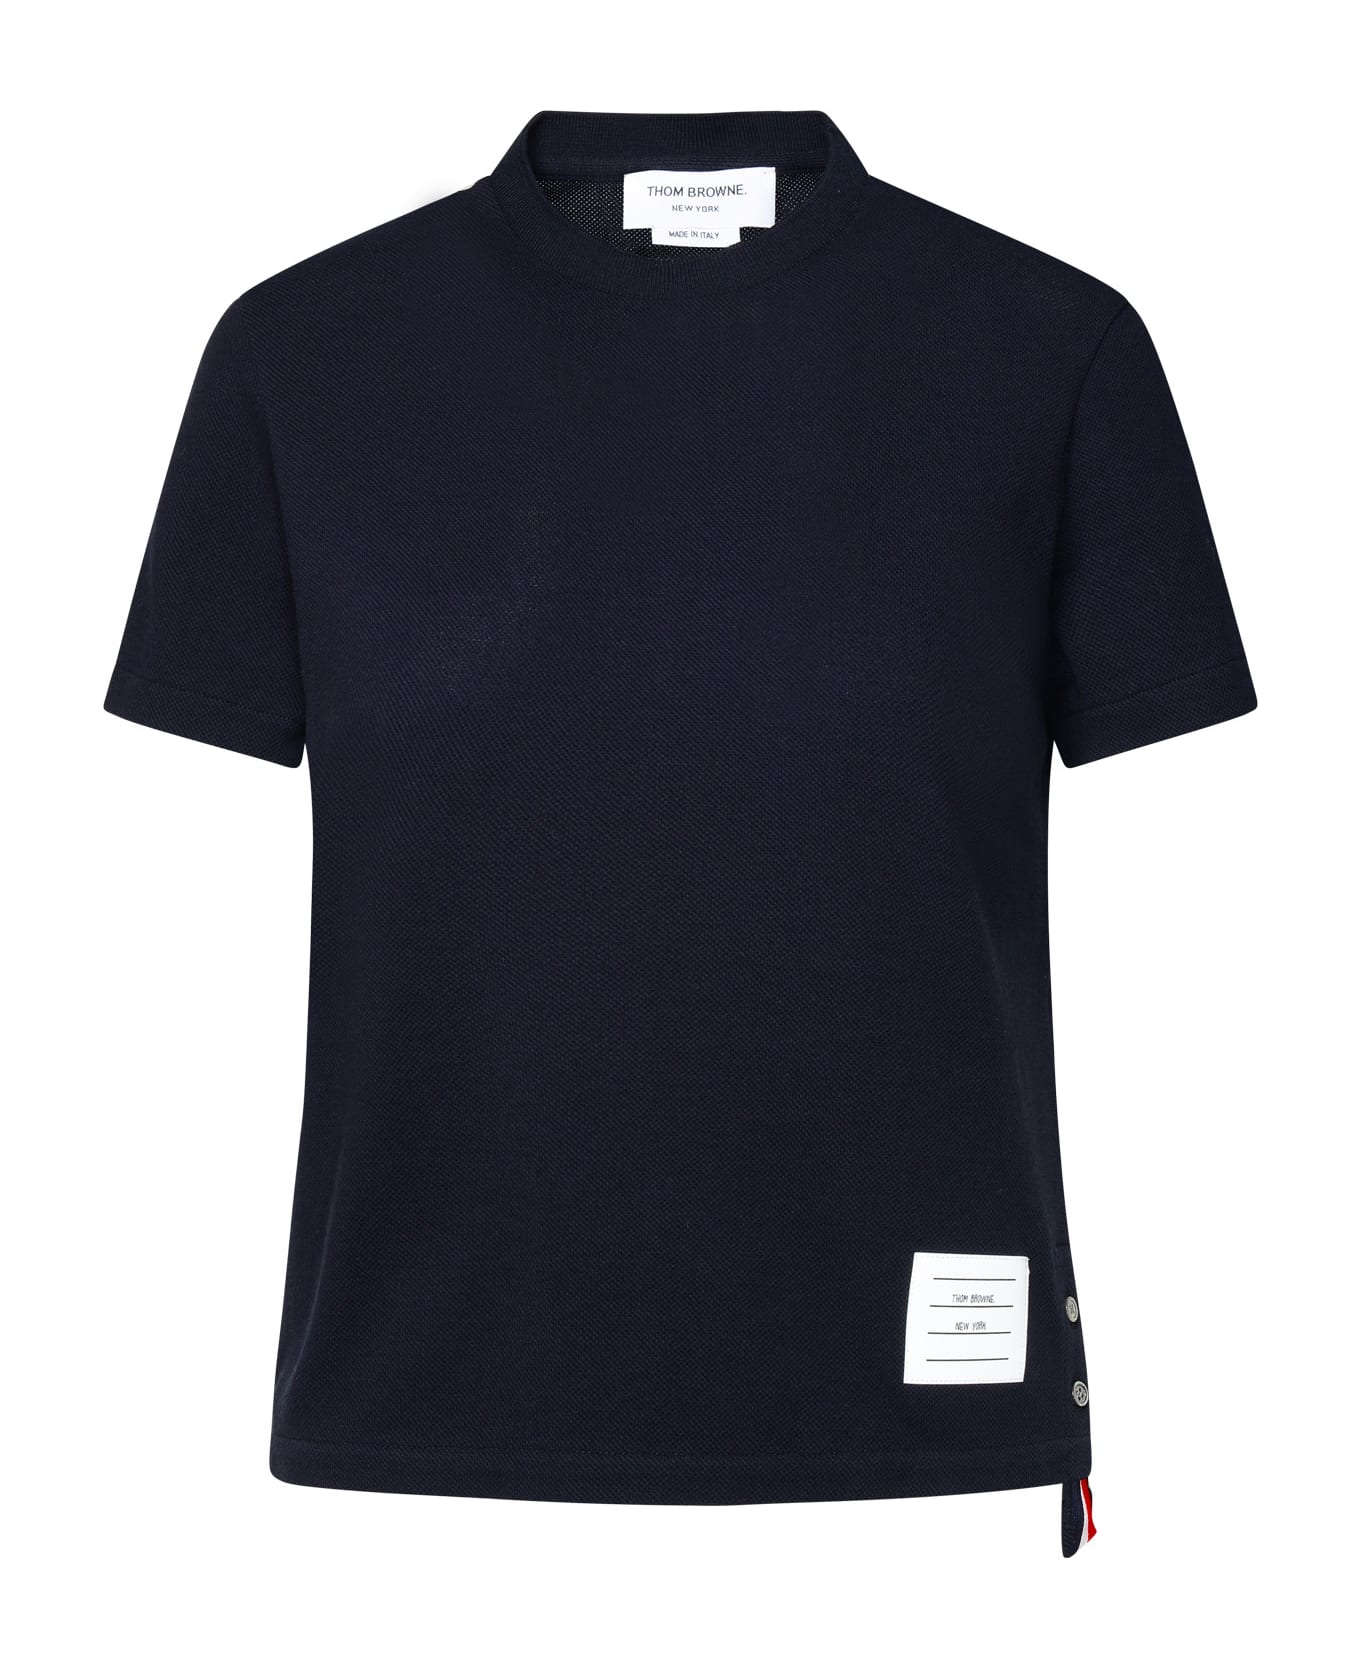 Thom Browne 'relaxed' Navy Textured Cotton T-shirt - BLUE